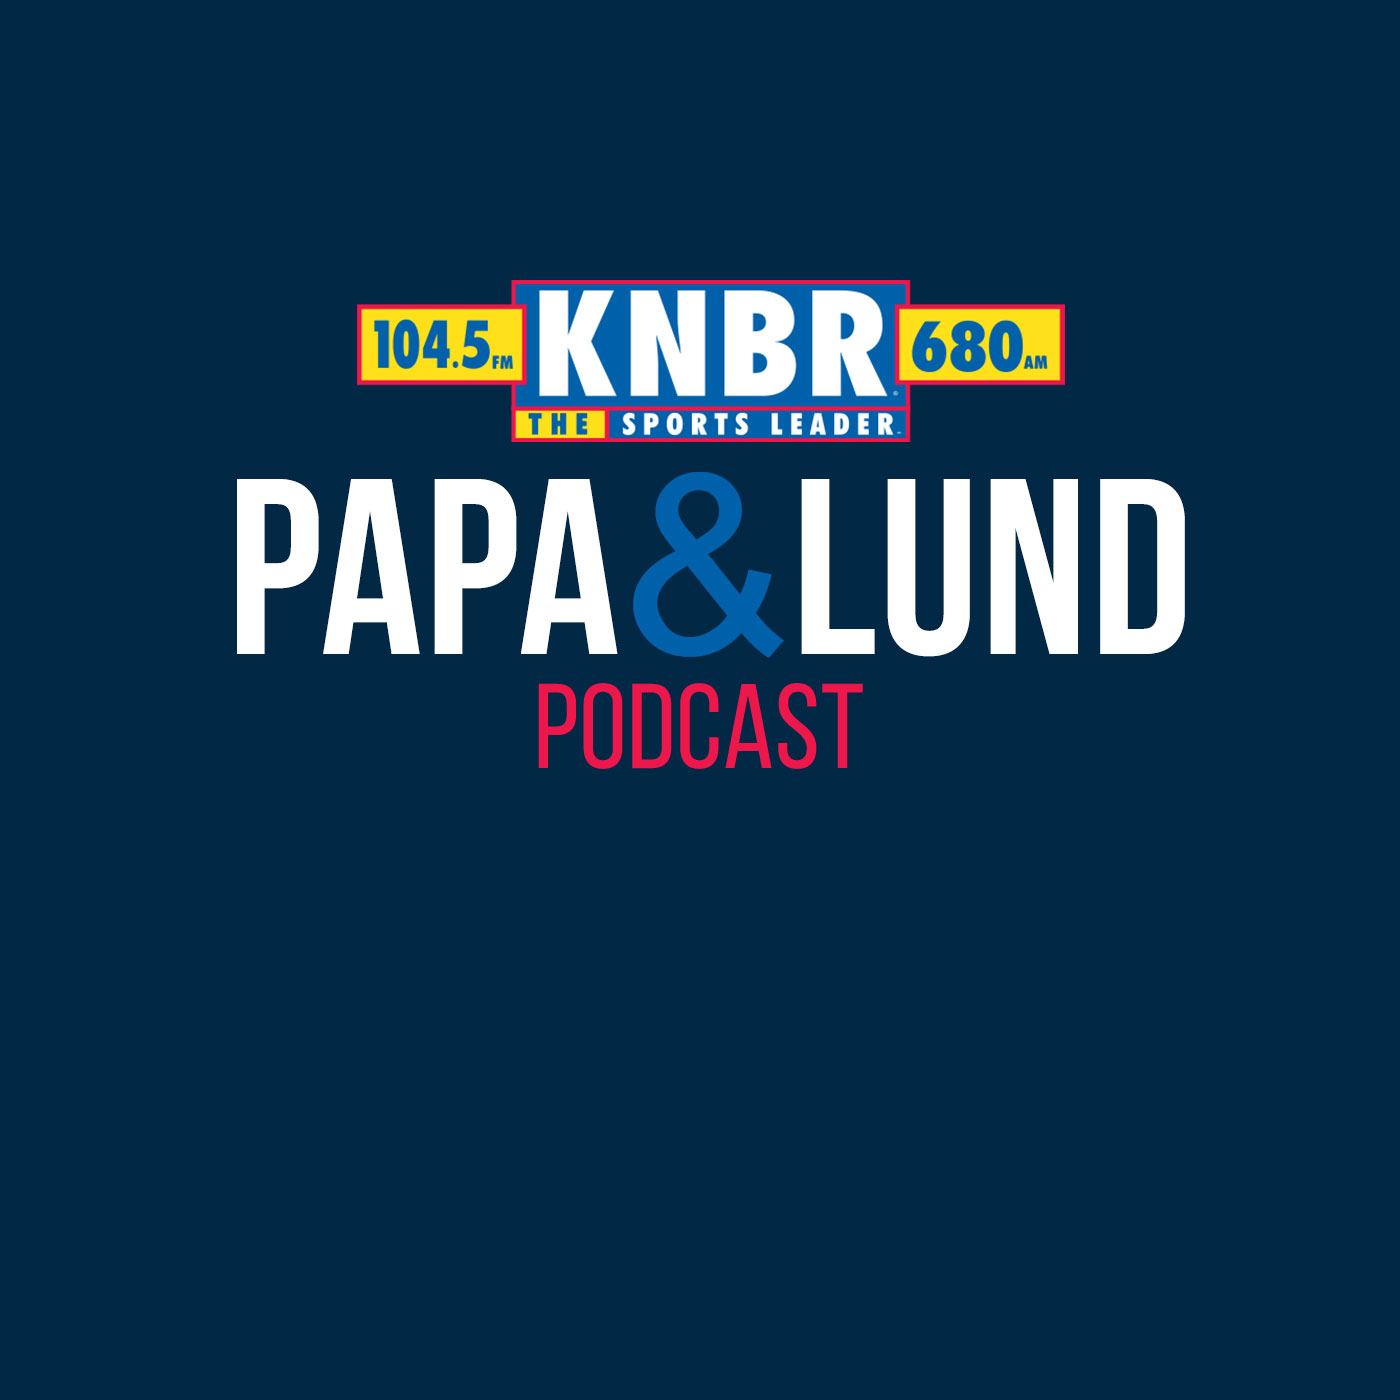 3-4 Mike Silver joins Papa & Lund to discuss the new 49ers Defensive Coordinator Nick Sorensen and the outlook on the draft and upcoming Free Agency